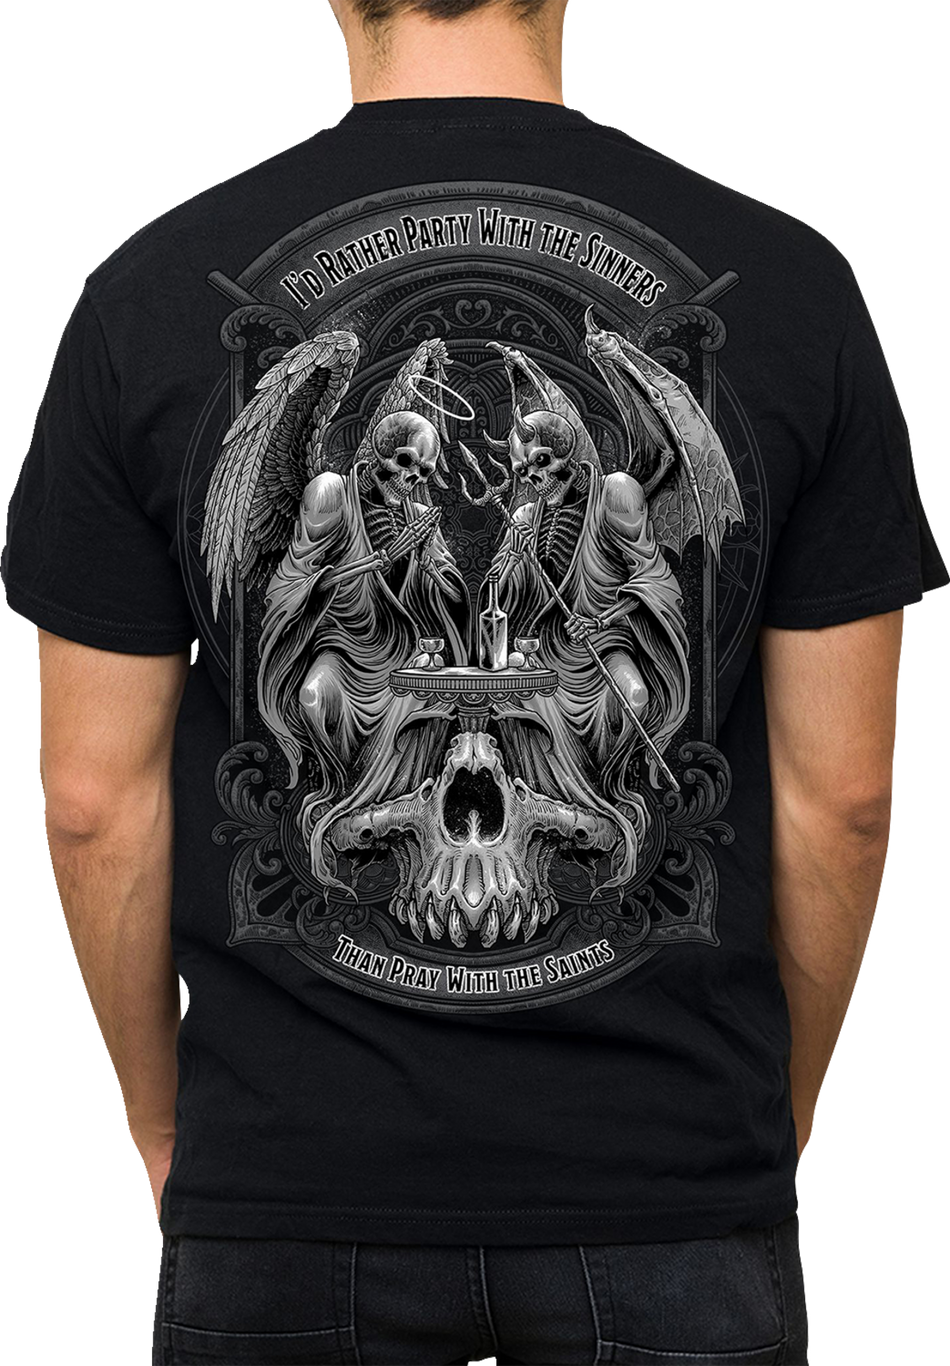 LETHAL THREAT Party with the Sinners T-Shirt - Black - 5XL LT20905-5XL